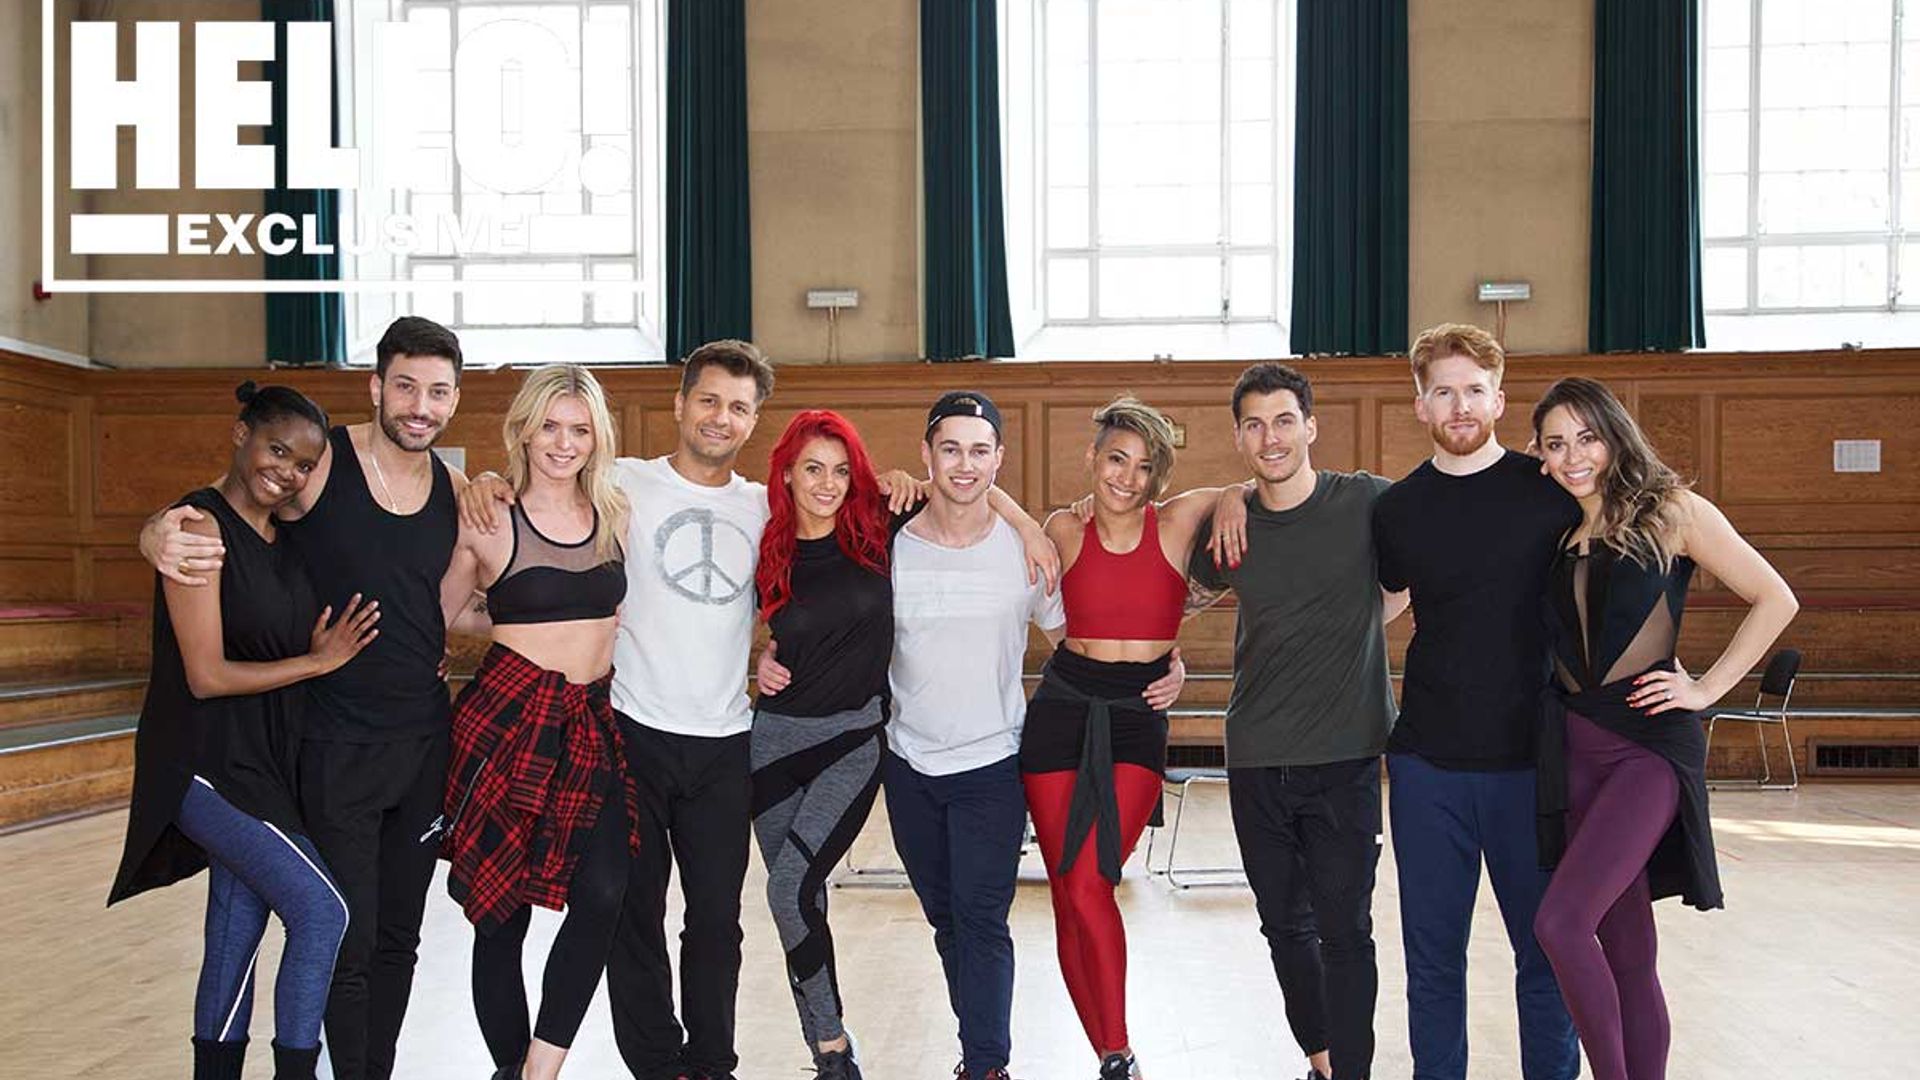 Exclusive: Strictly pros open up about hopes for Darcey Bussell's replacement following her shock exit